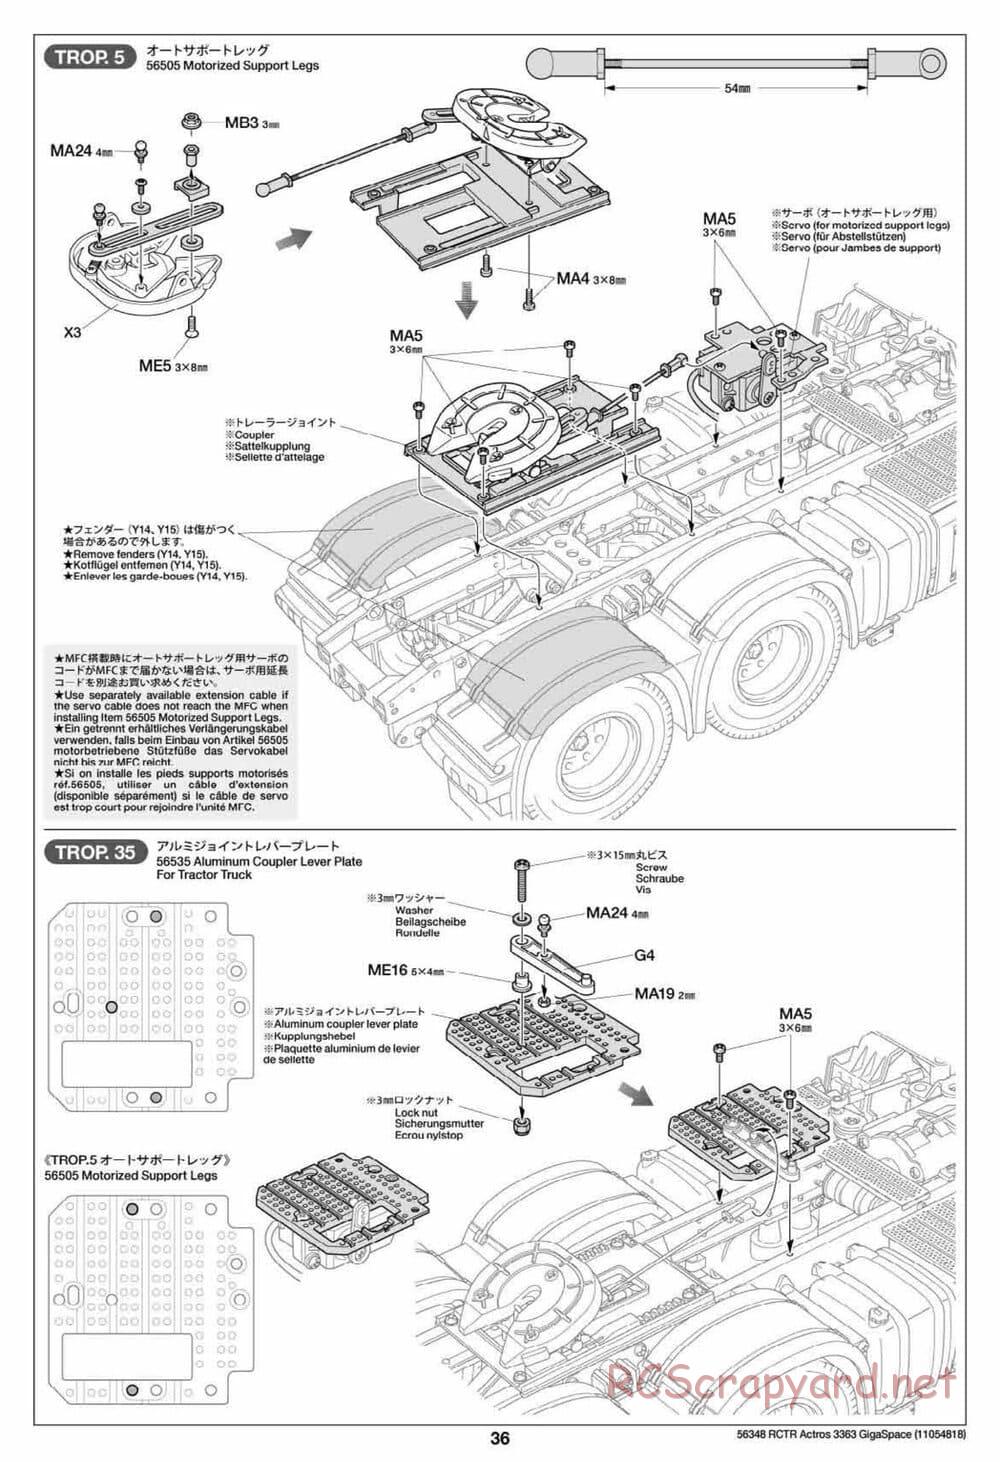 Tamiya - Mercedes-Benz Actros 3363 6x4 GigaSpace Tractor Truck Chassis - Manual - Page 36